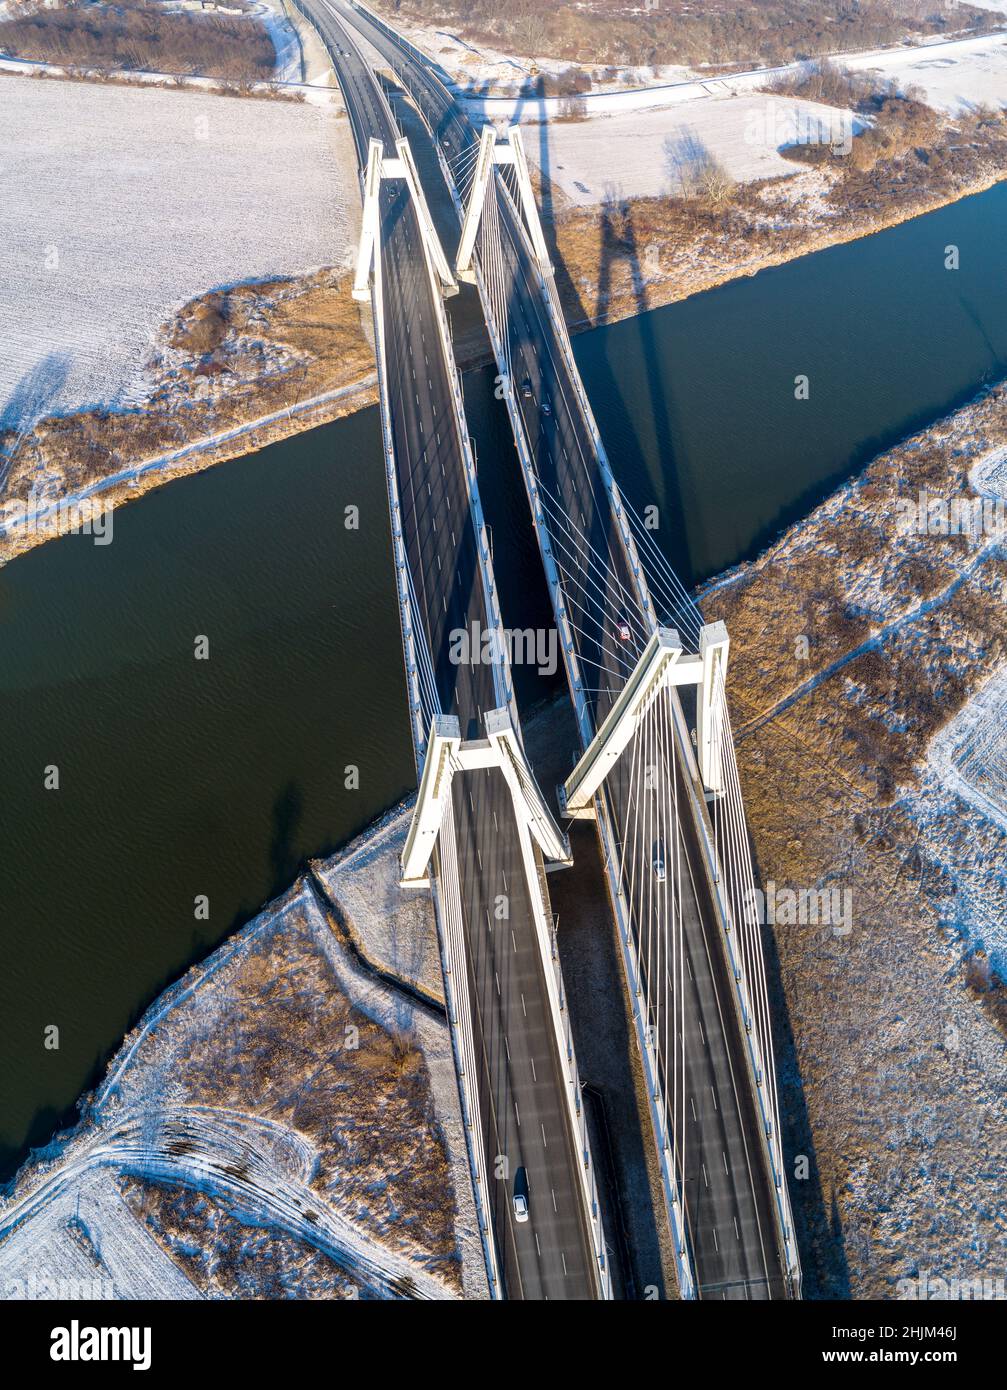 New modern Macharski double cable-stayed three-lane suspension bridge over Vistula River in Krakow, Poland. Aerial view from above in winter. Part of Stock Photo